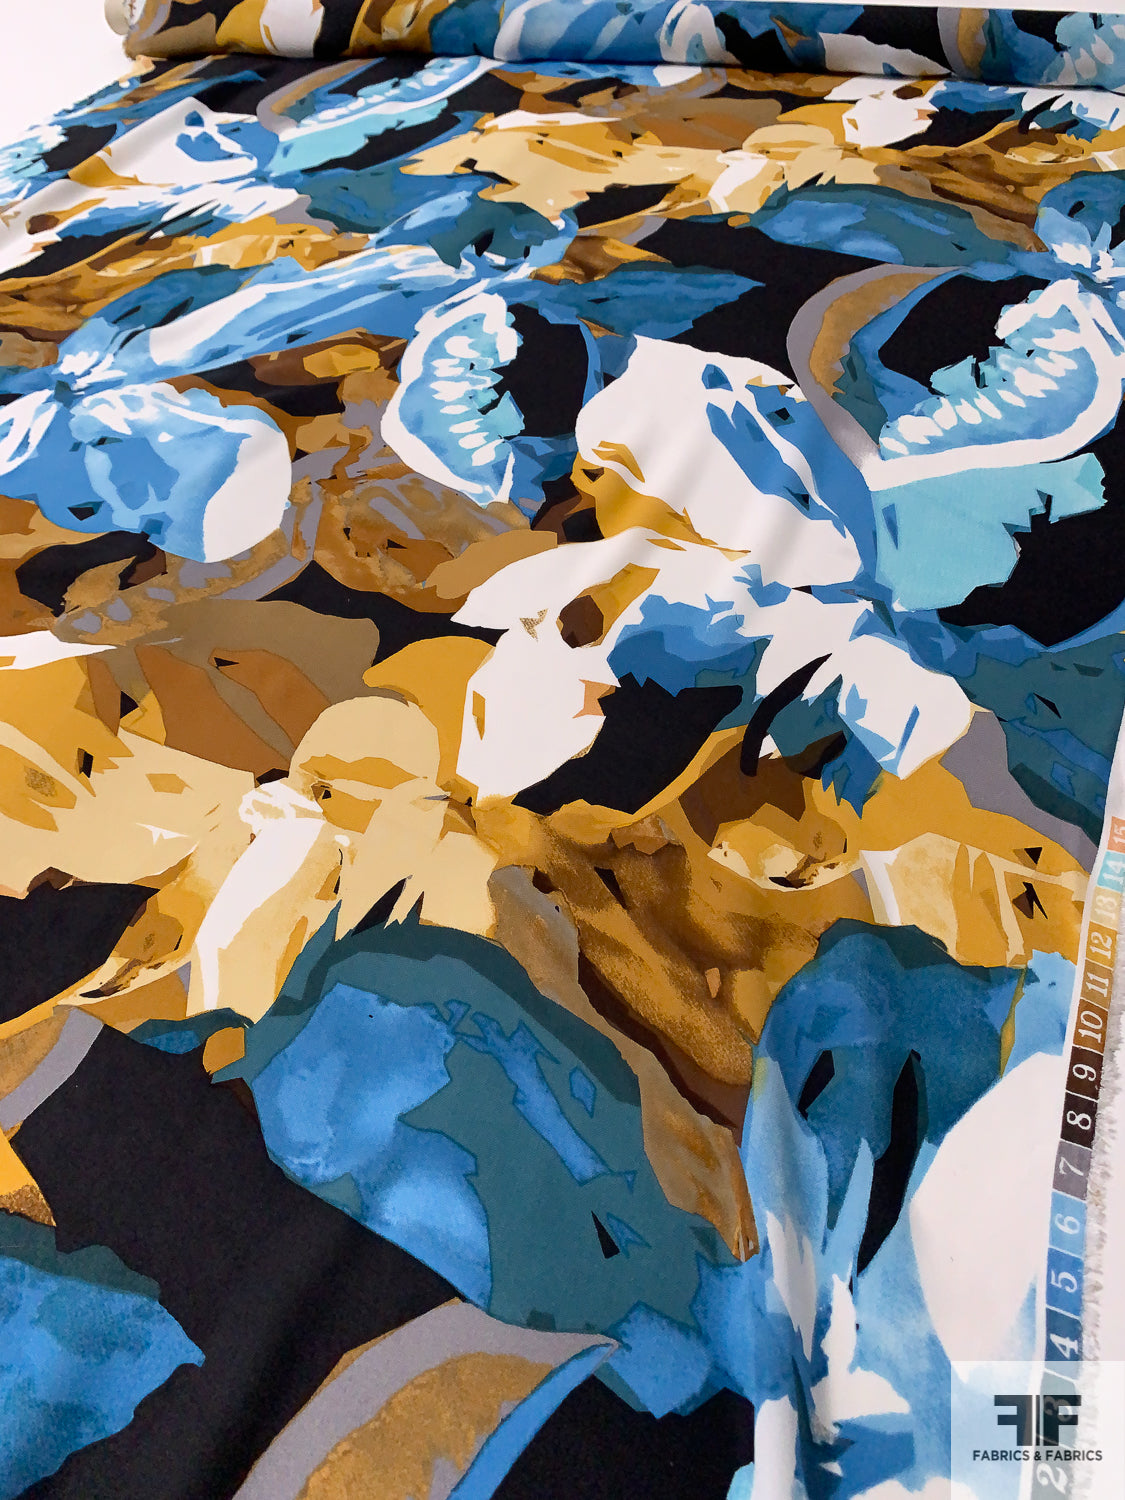 Bold Graphic Floral Printed Silk Georgette - Shades of Blue / Gold / Black / White